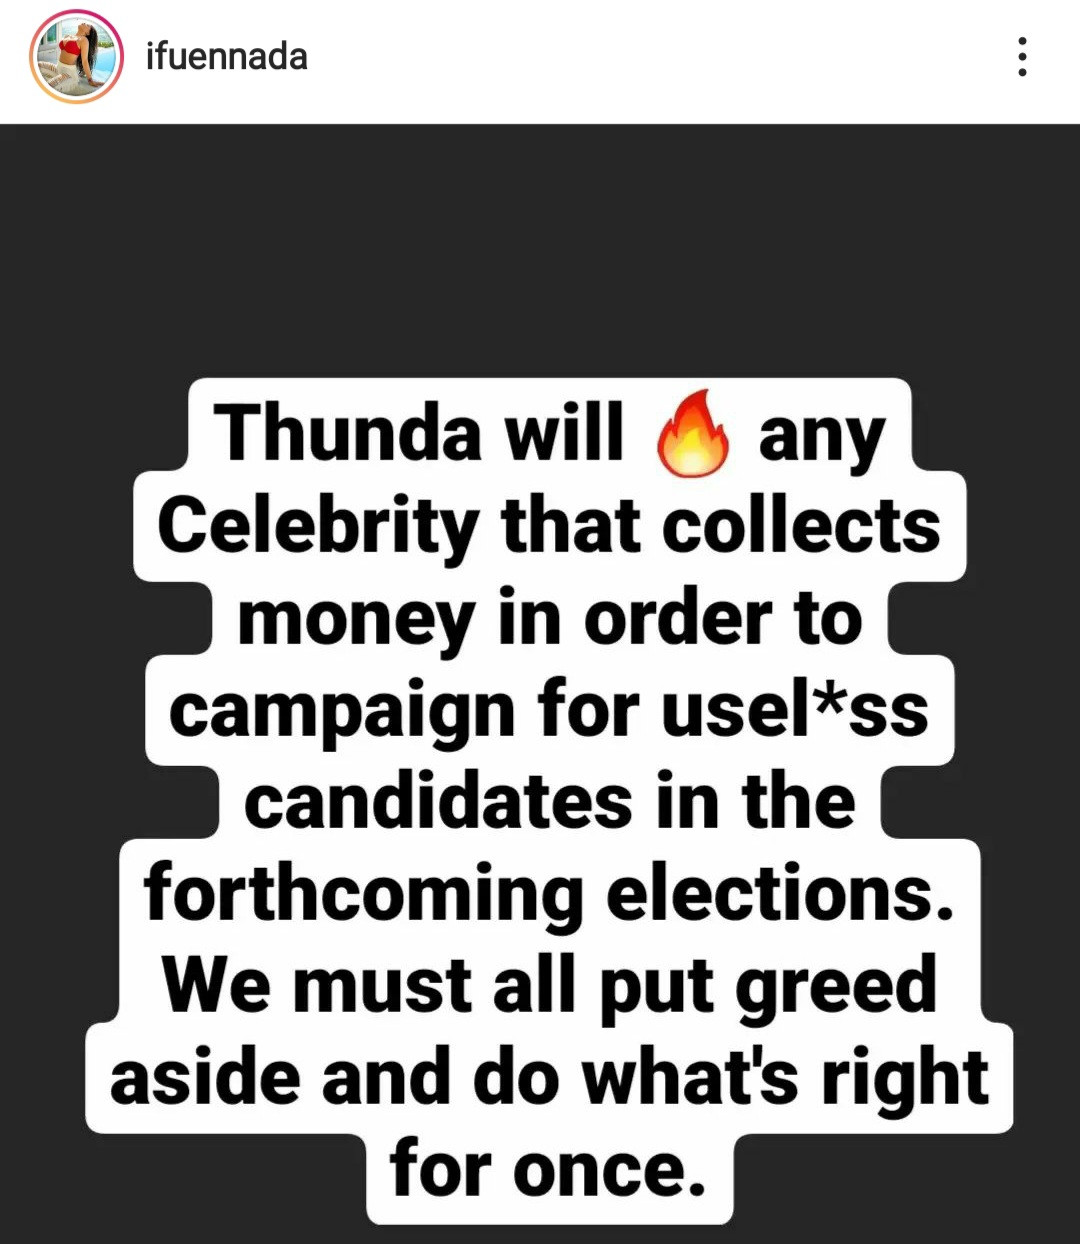 2023: Thunder will fire any celebrity that collects money to campaign for useless candidates - Reality TV star Ifuennada